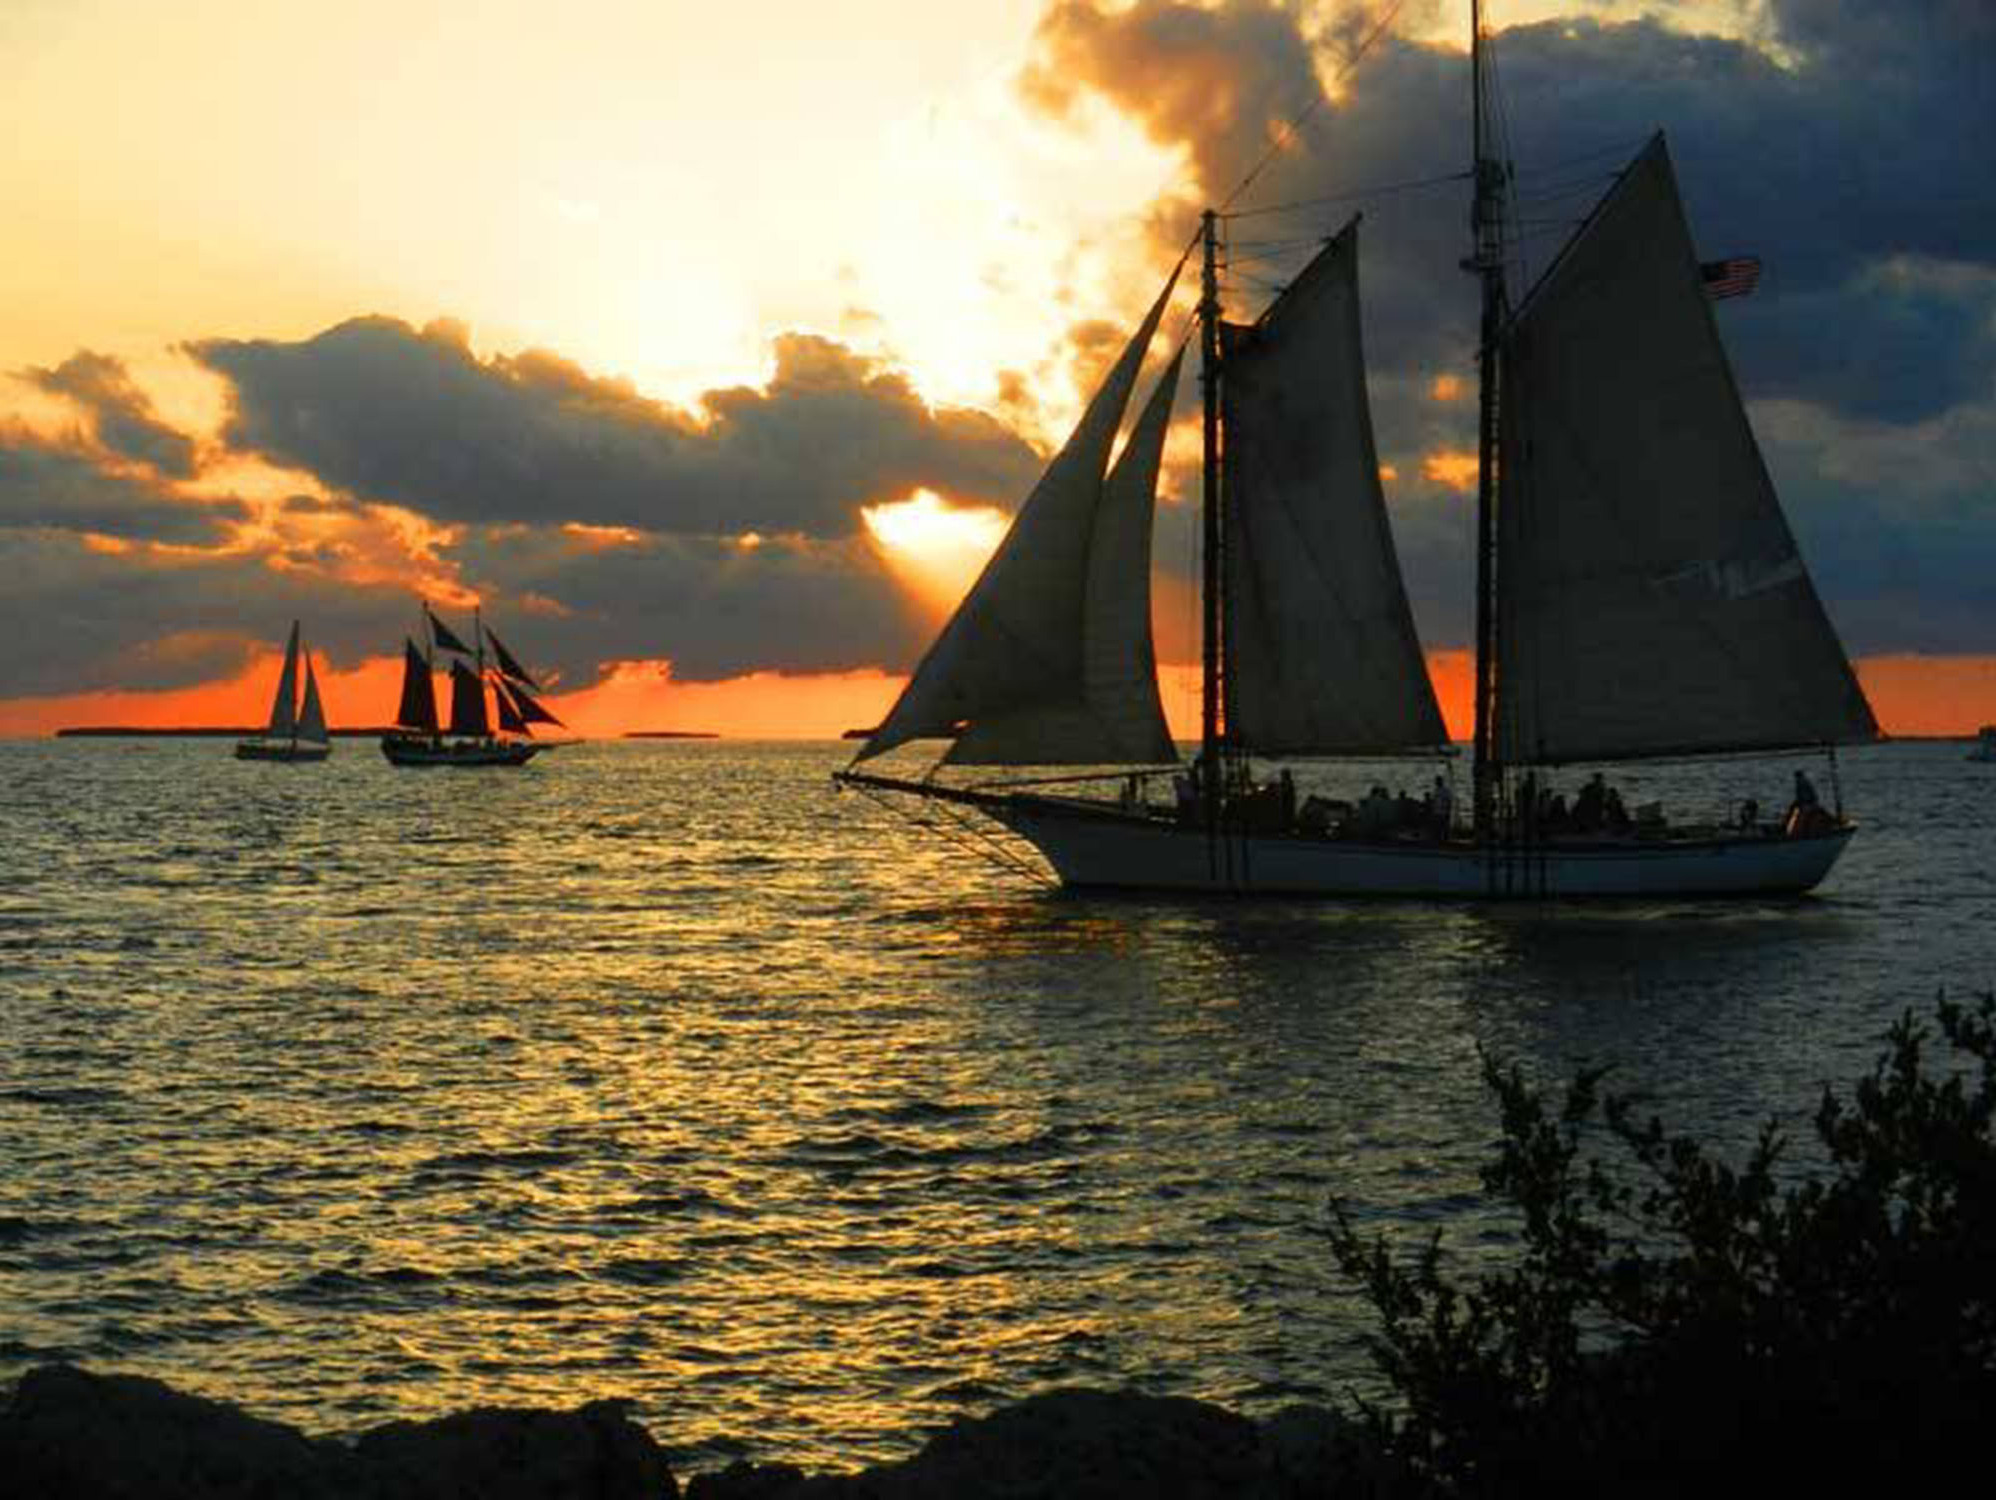 The Historic Key West Seaport has about a dozen sunset cruises available.